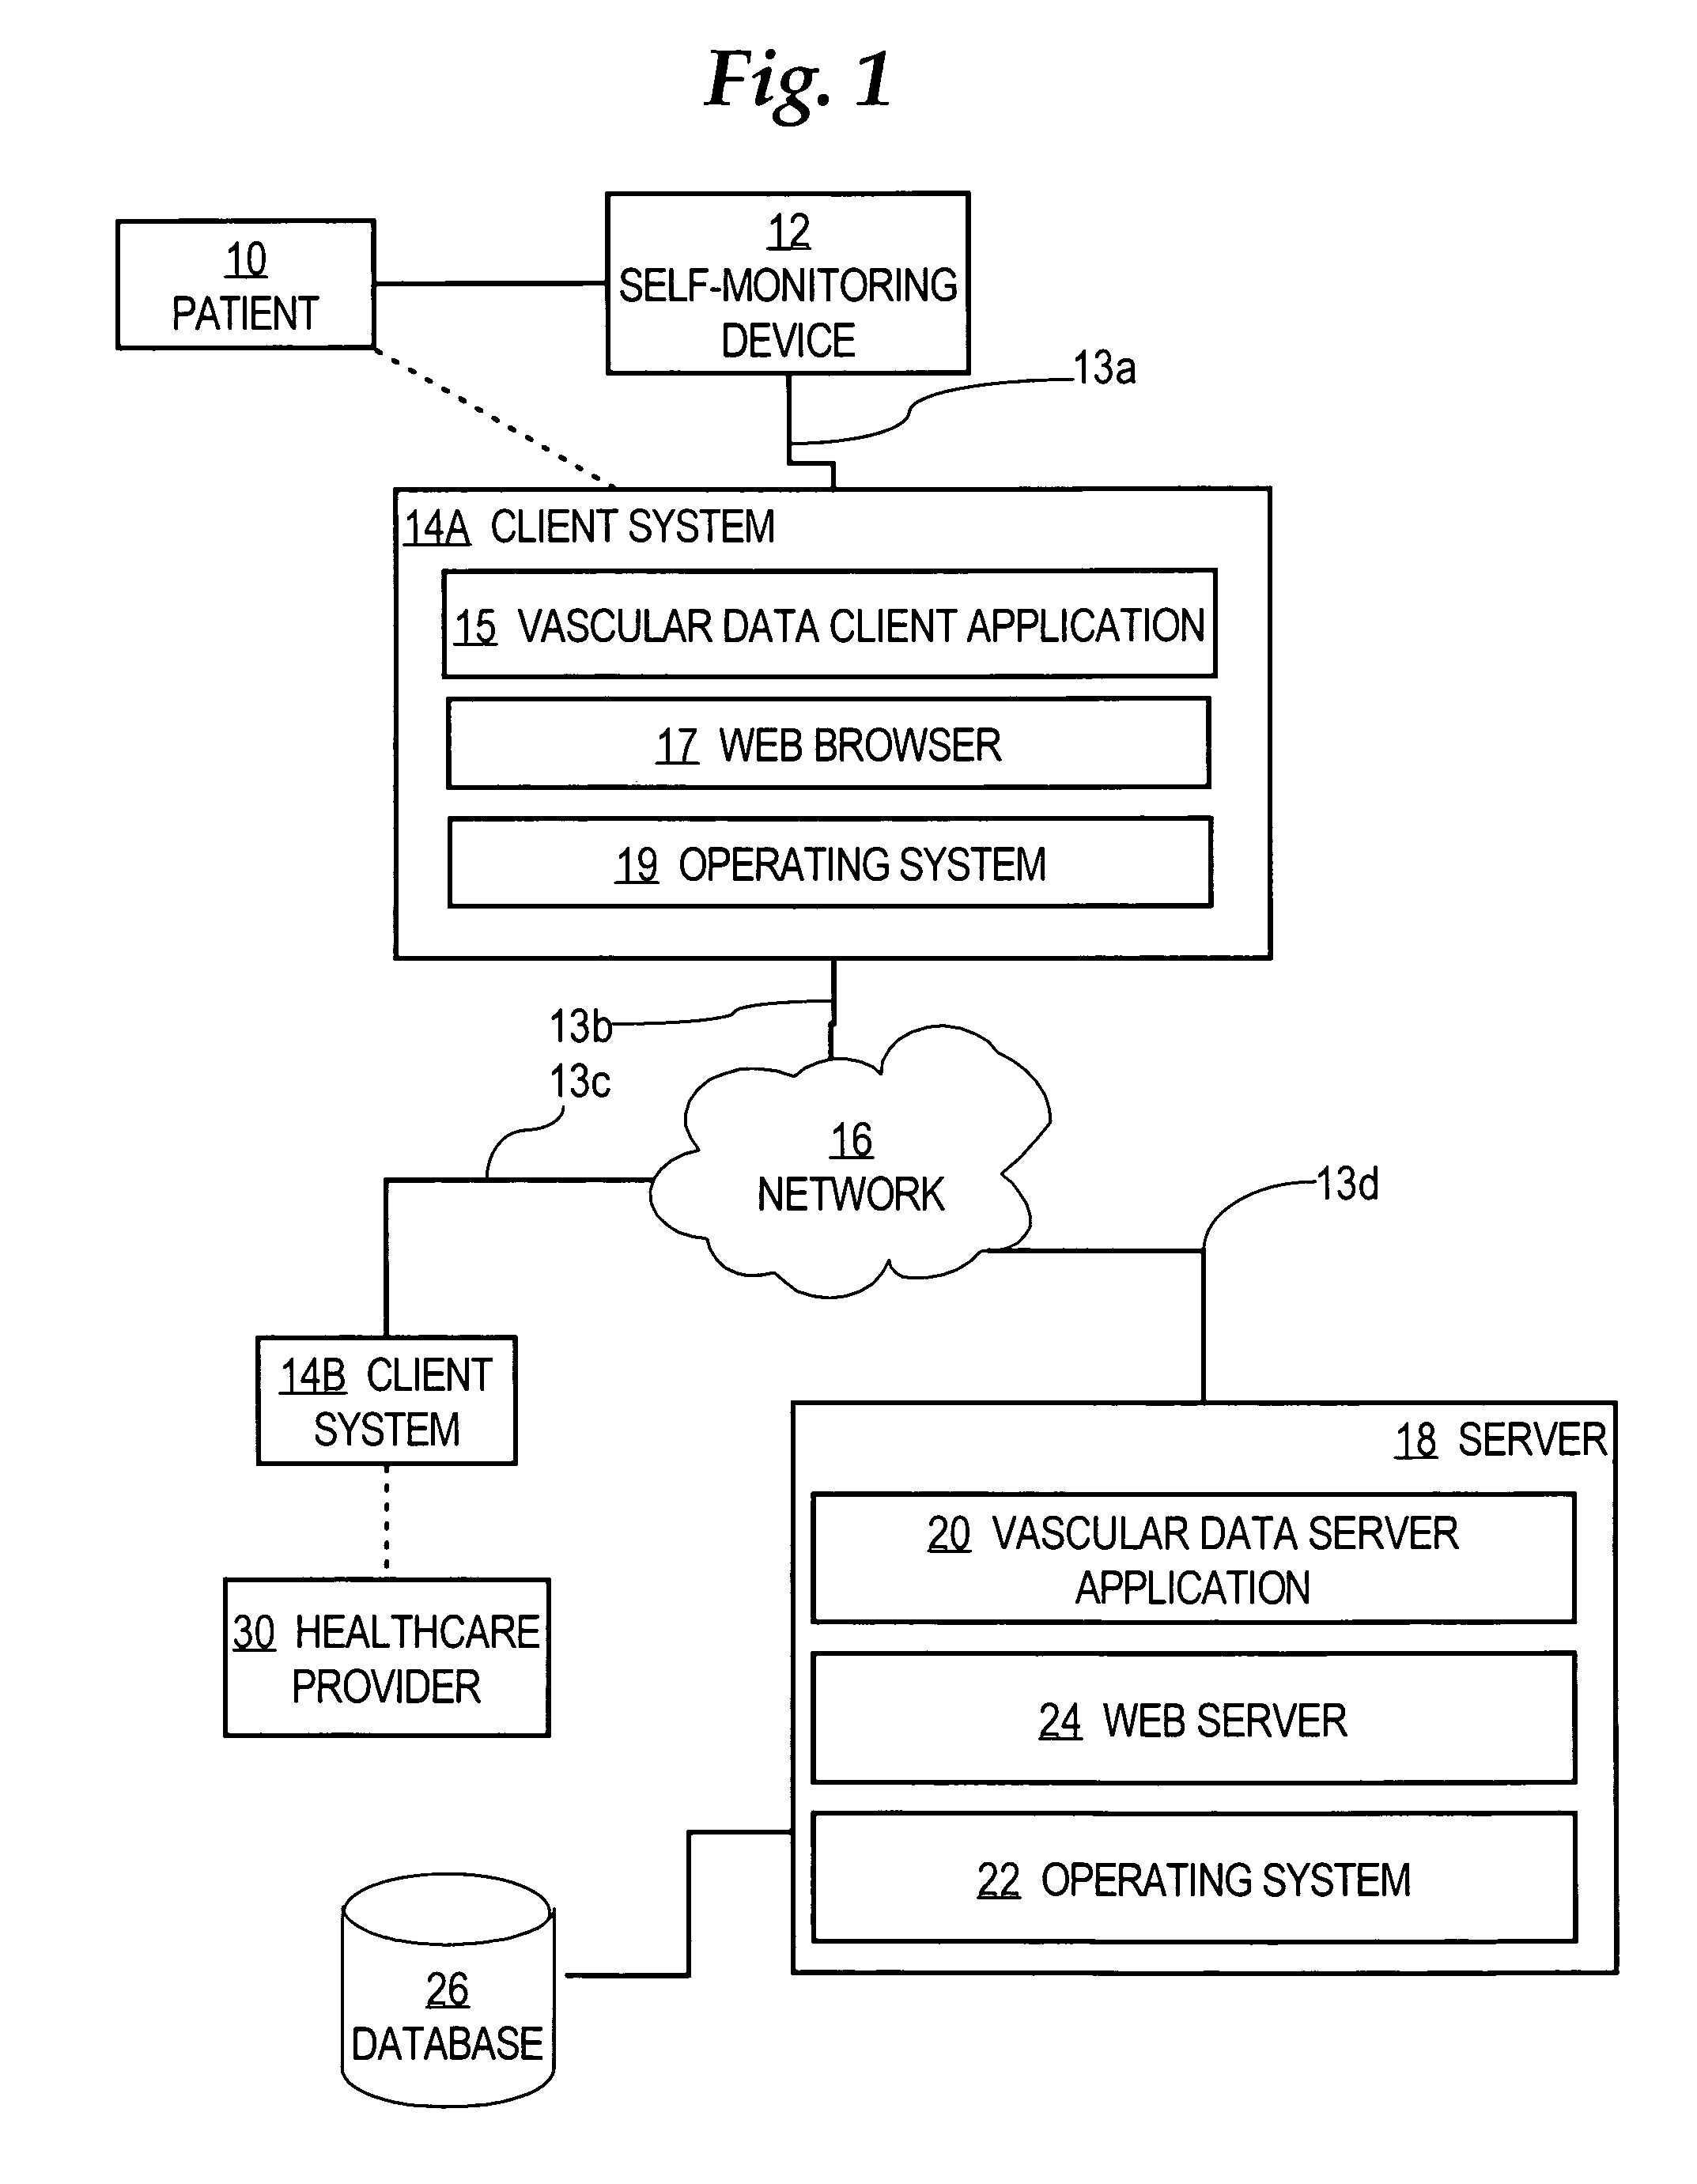 System for improving vascular systems in humans using biofeedback and network data communication